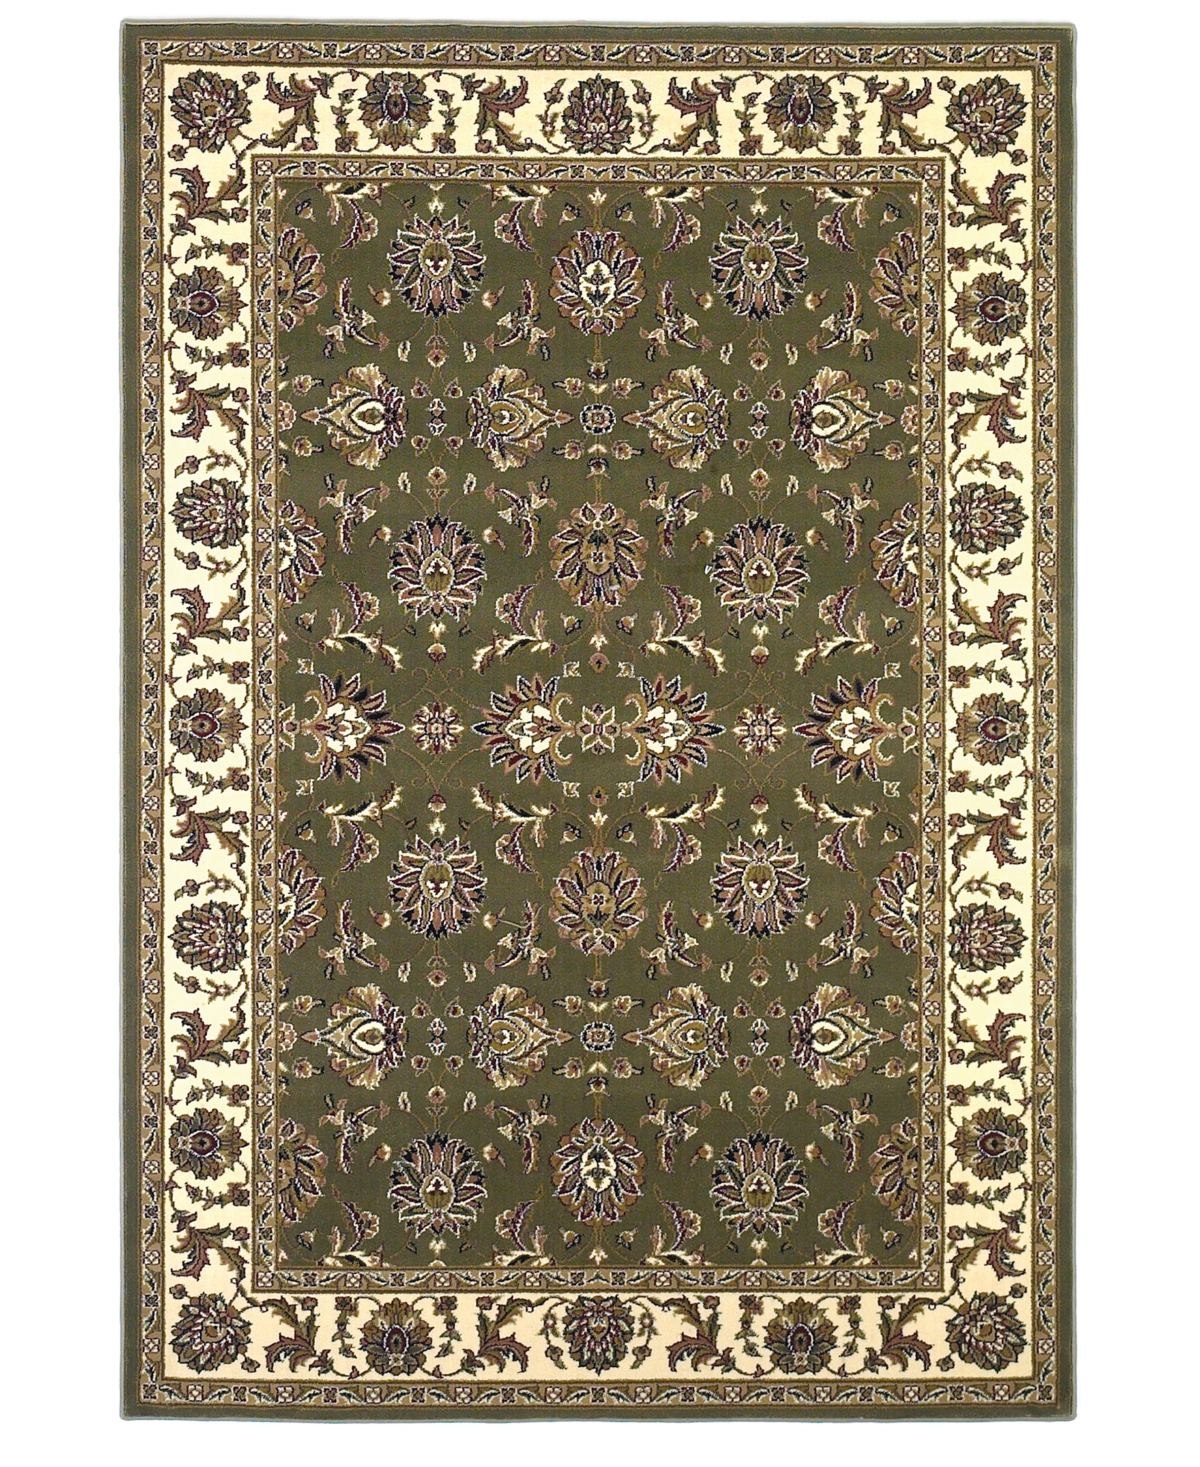 Kas Cambridge Han 7'7" Round Area Rug In Green,ivory